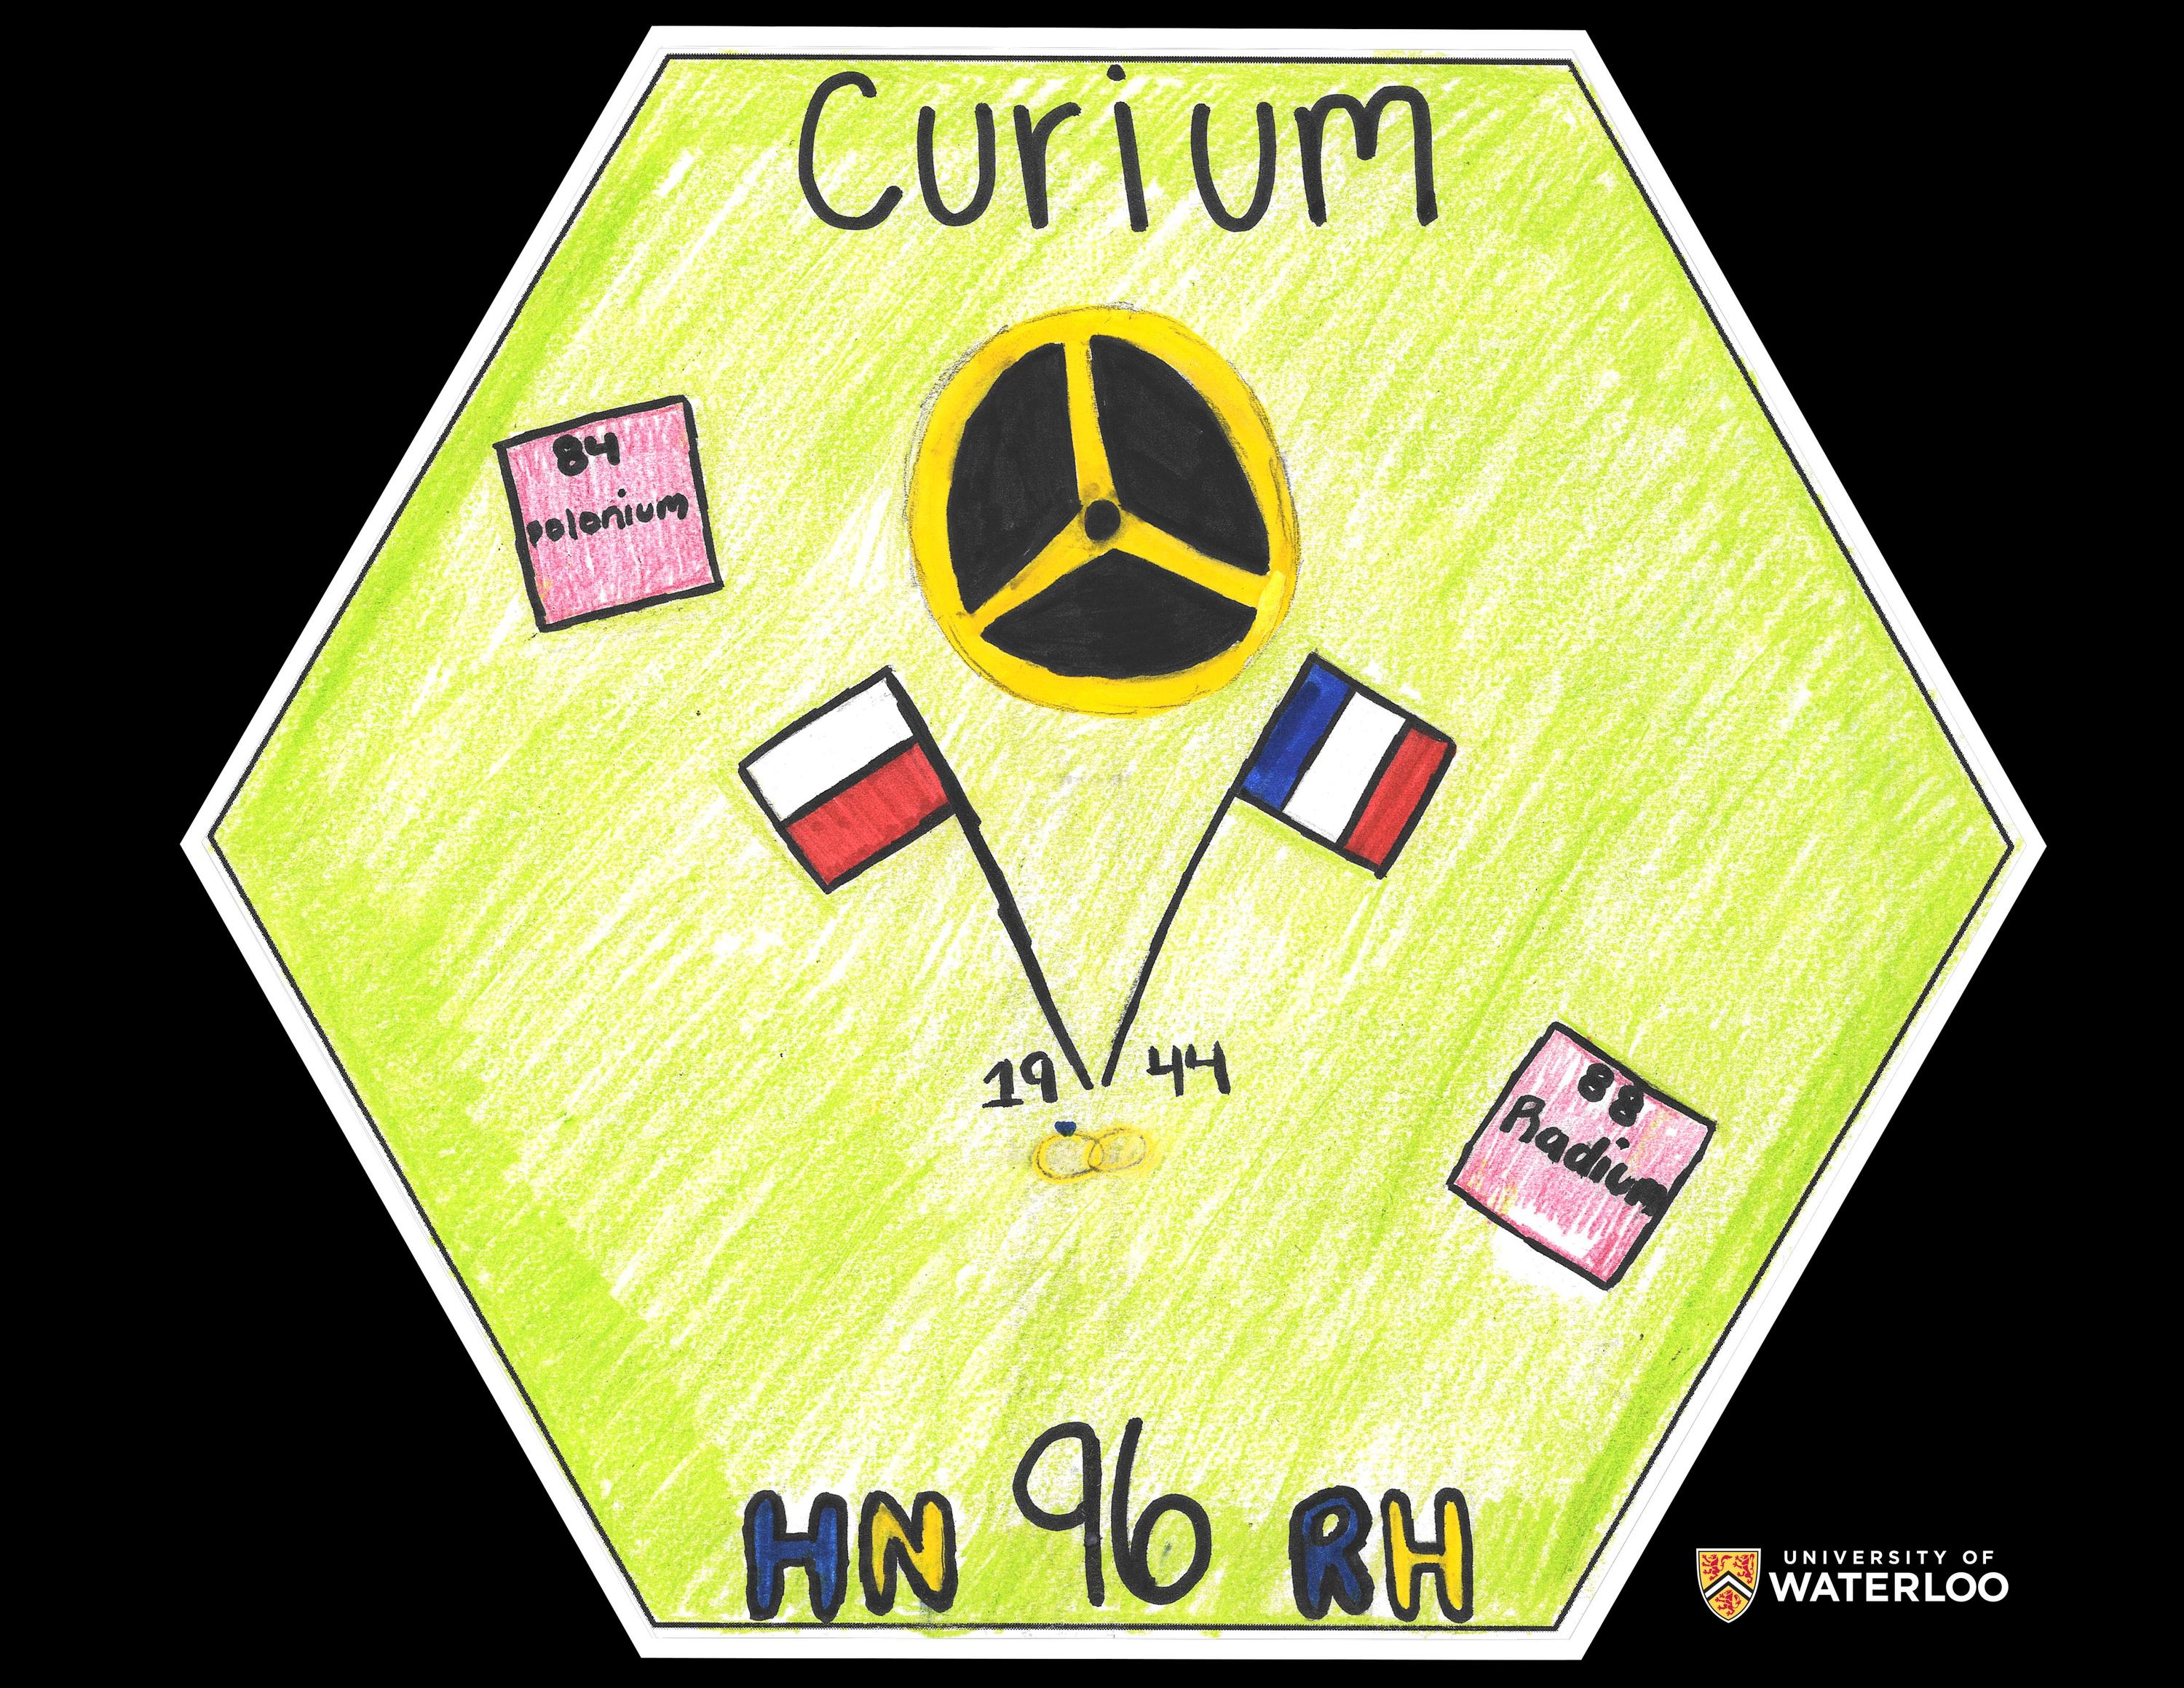 Crayon, pen and ink on light green background. “Curium” appears top with a radioactive symbol below. Centre are the Polish and French flags with “1944” and two wedding rings. To the sides are the periodic table tiles for Polonium and Radium. At the bottom “HN”, “96, and “RH”.